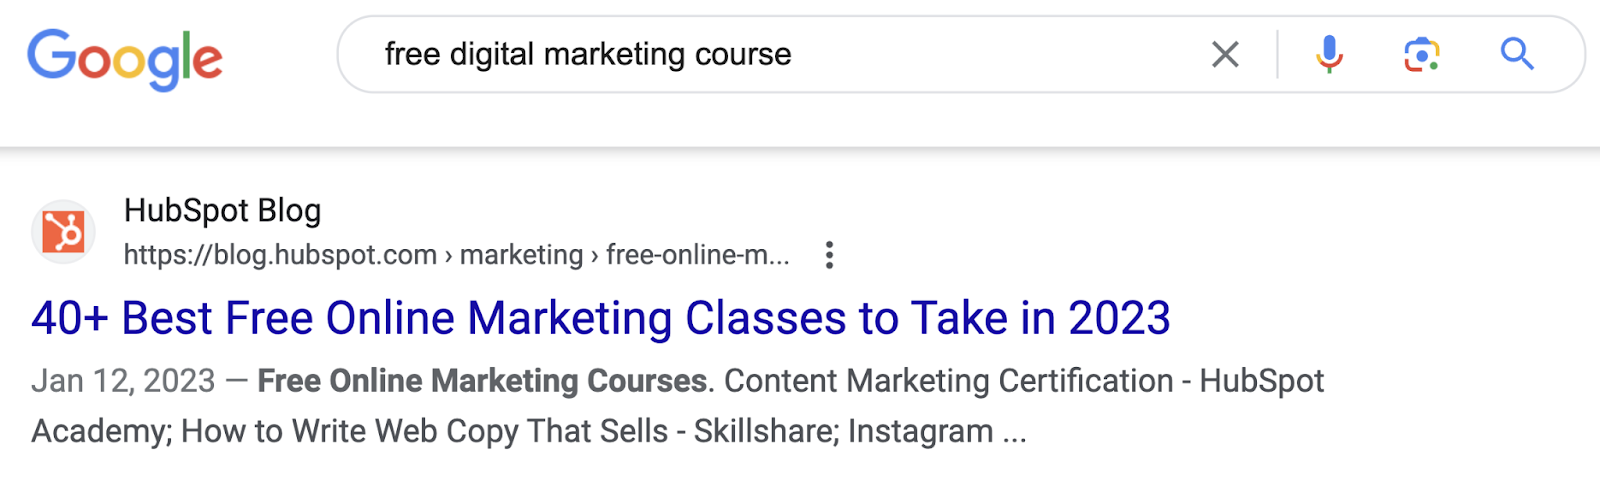 HubSpot listicle for free digital marketing courses on Google SERP